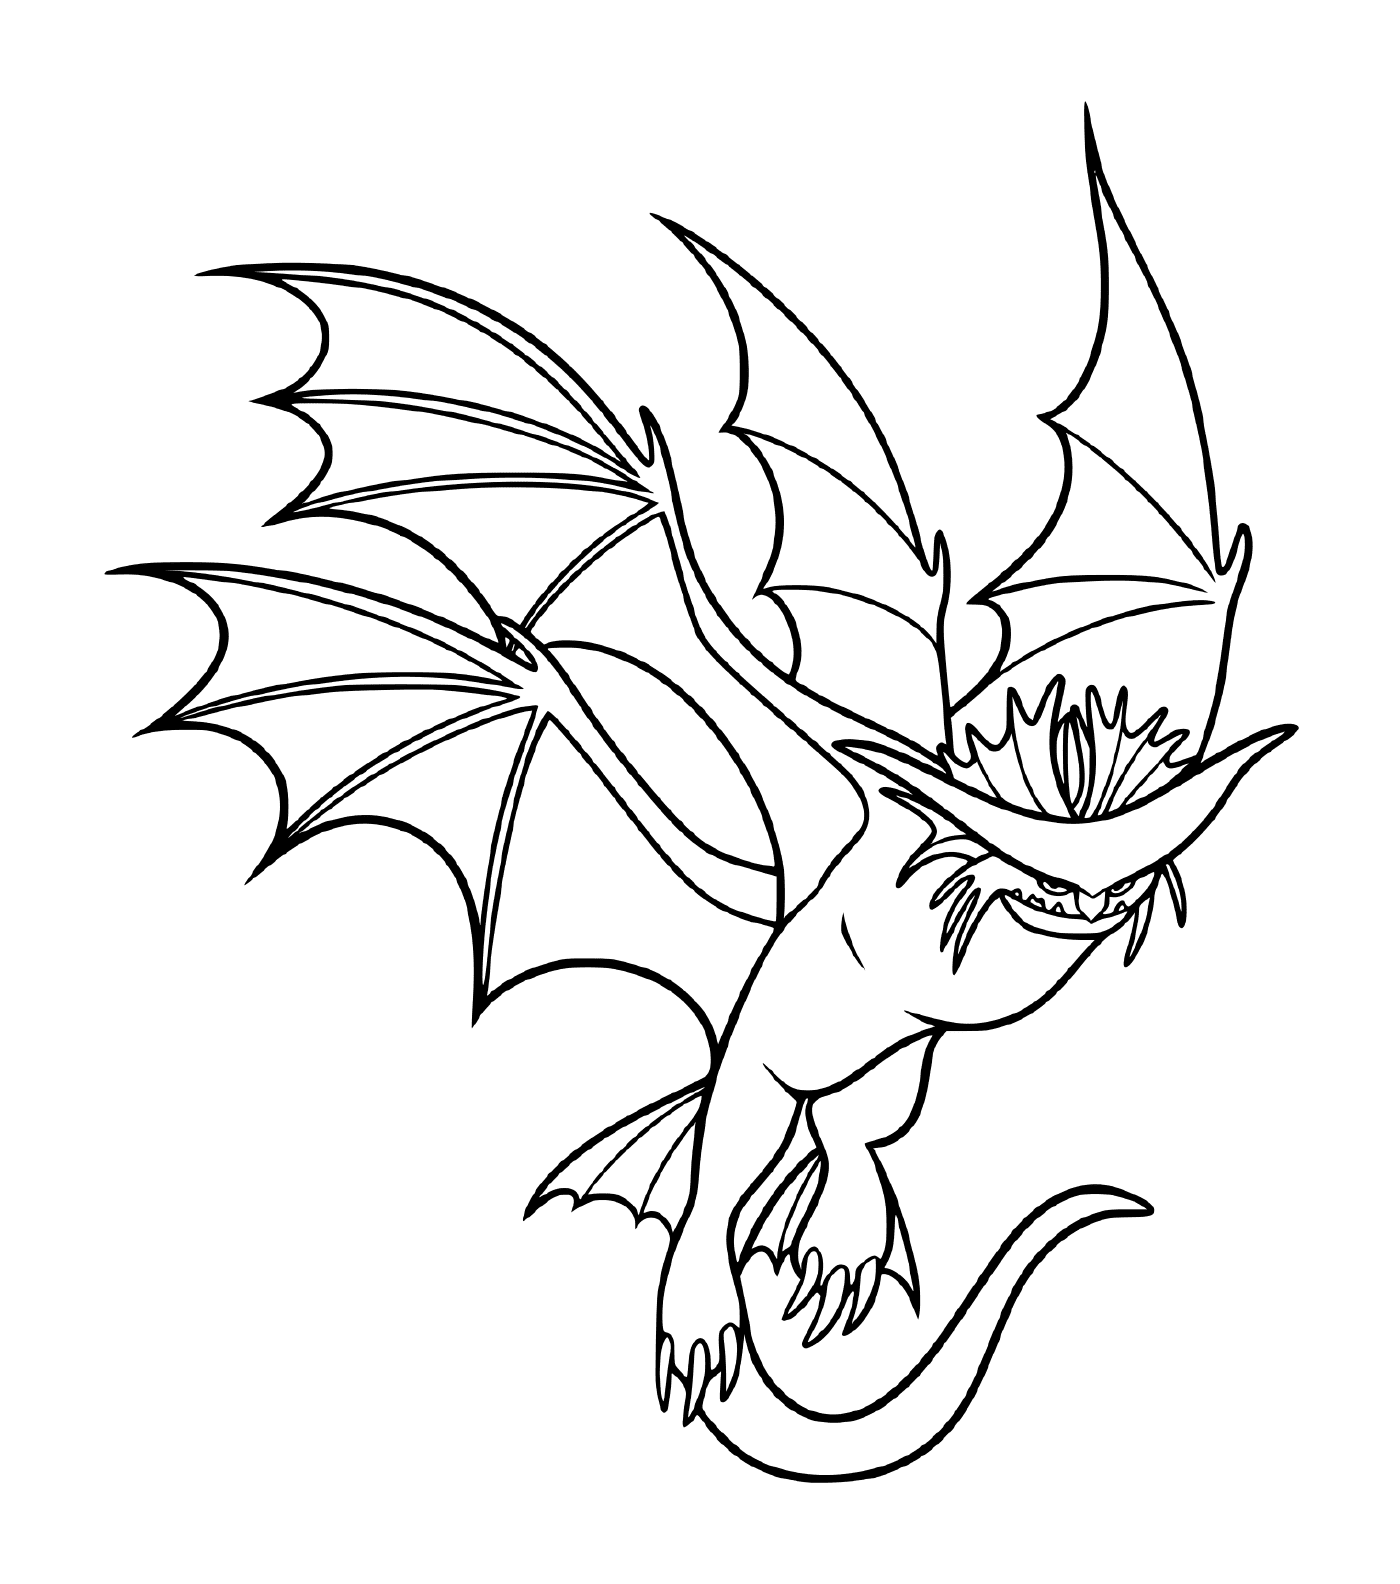  Cloudjumper, a dragon with deployed wings 